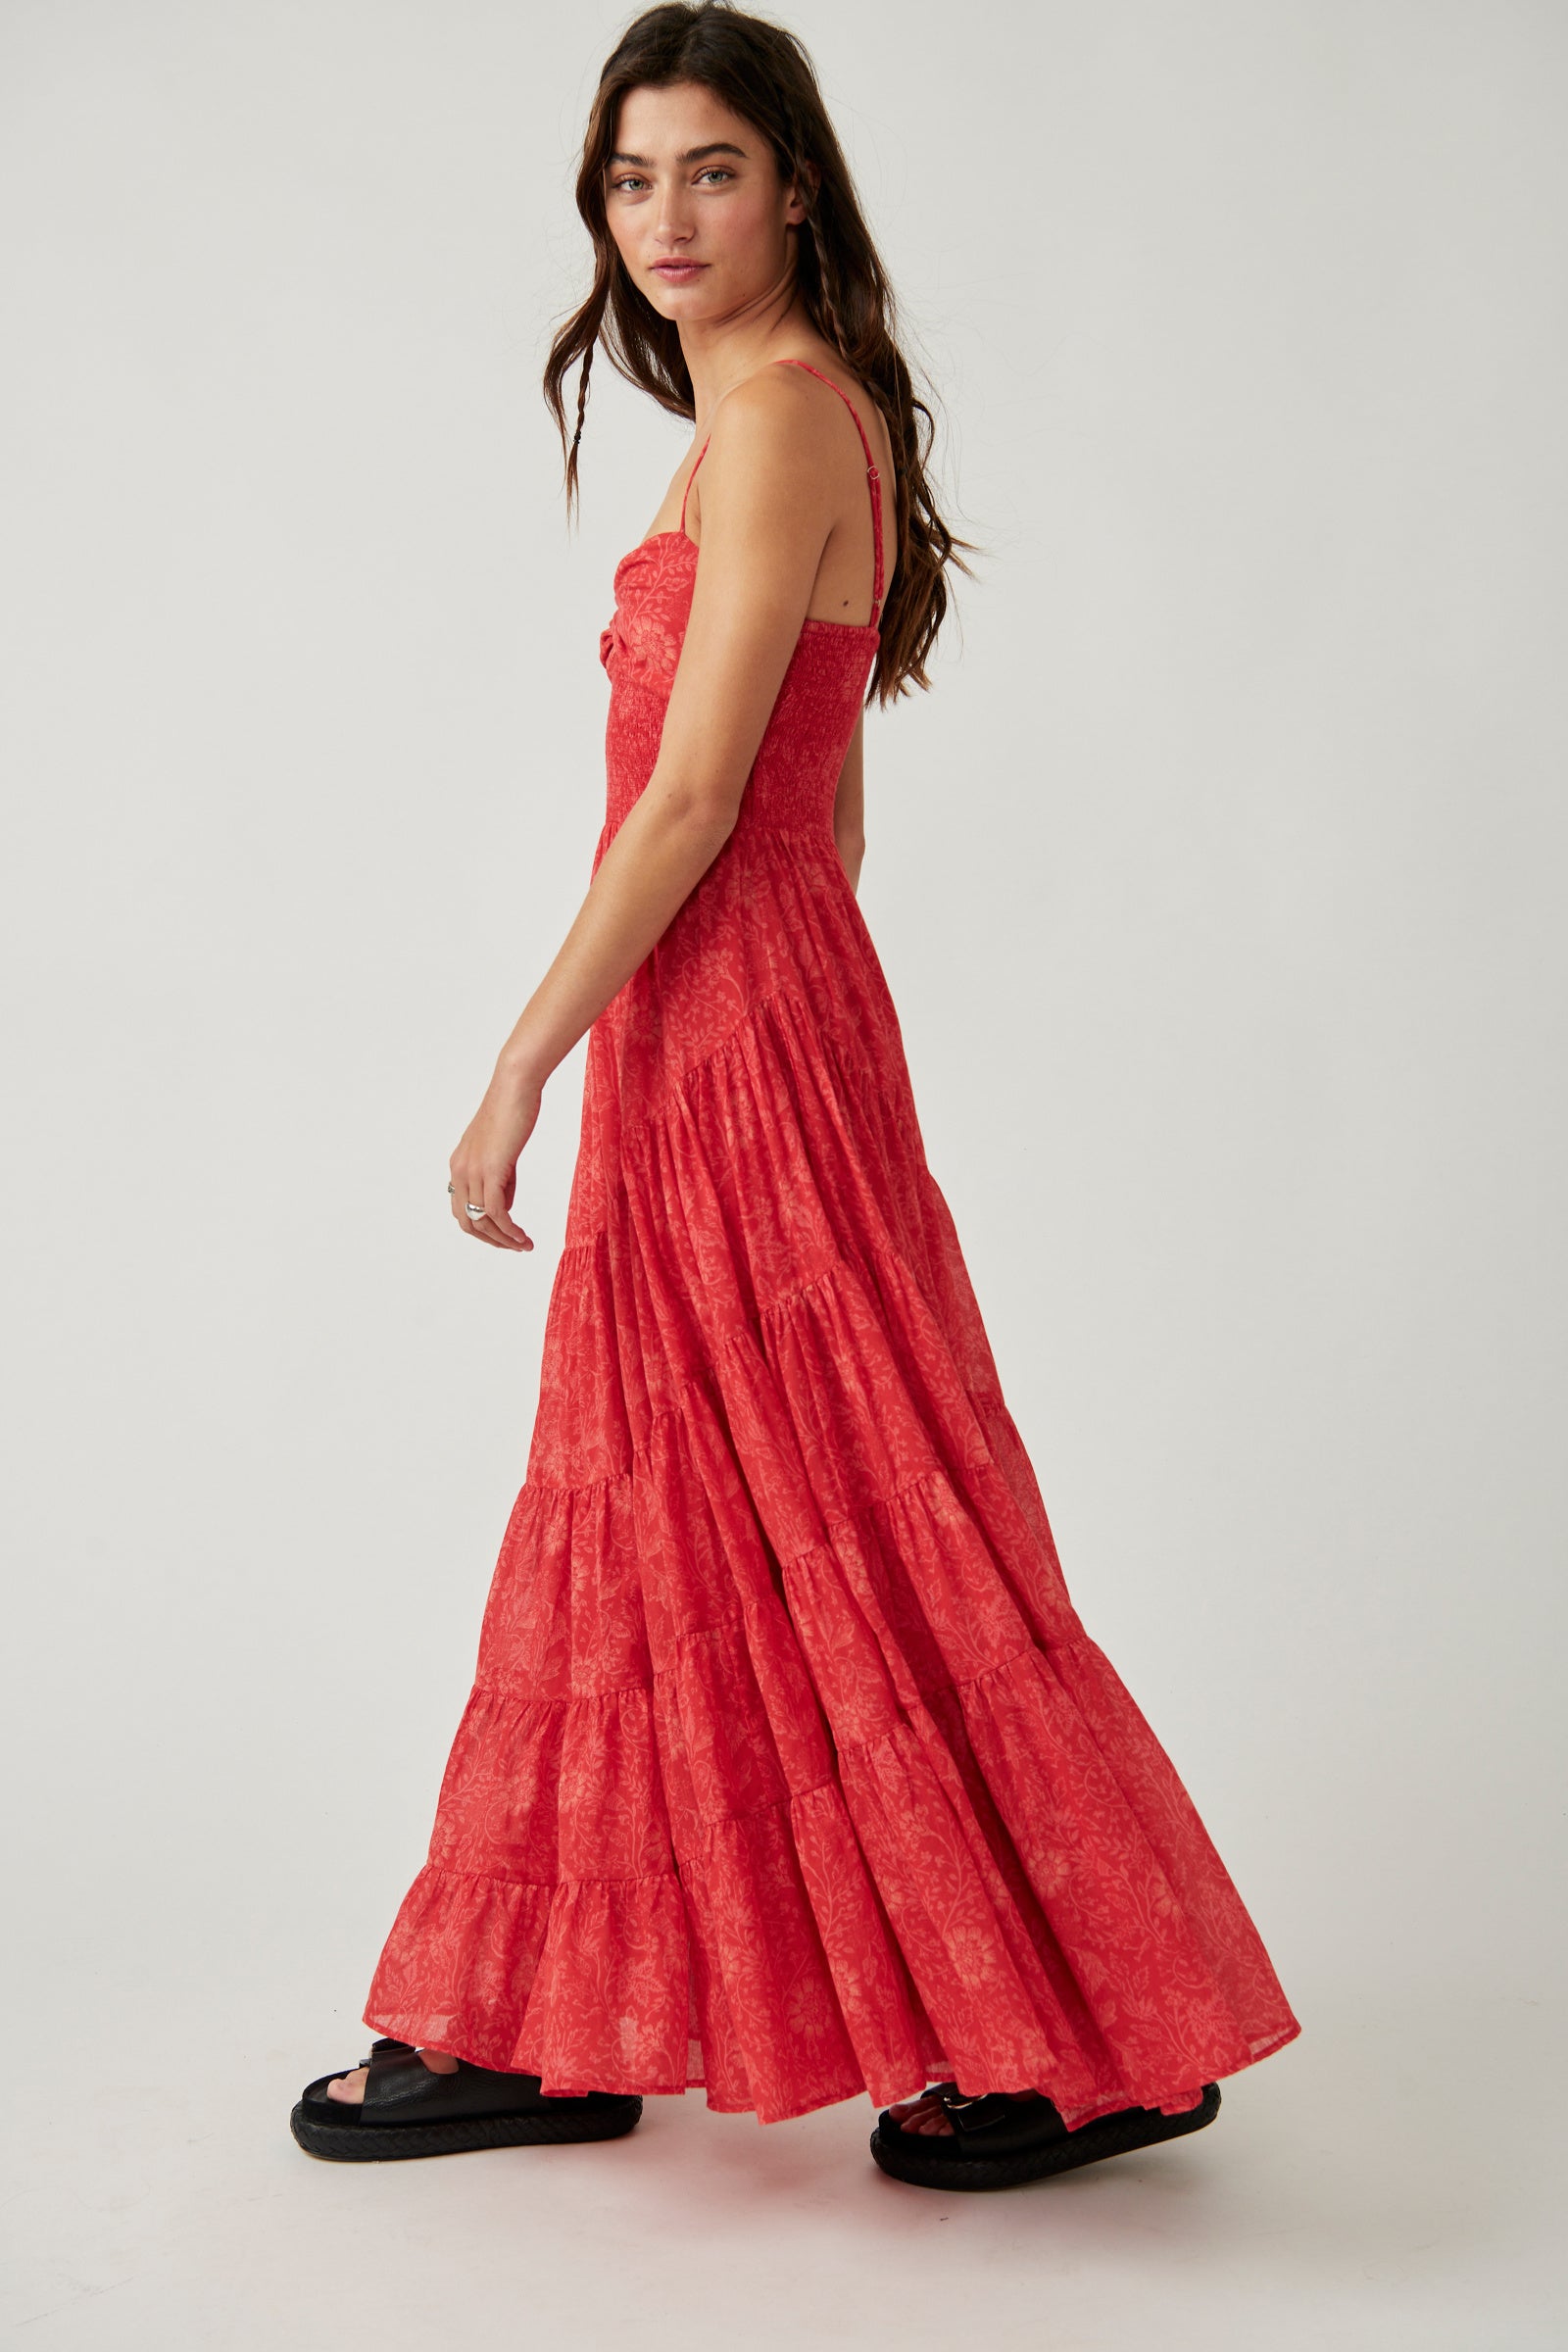 FREE PEOPLE SUNDRENCHED PRINTED MAXI IN RED